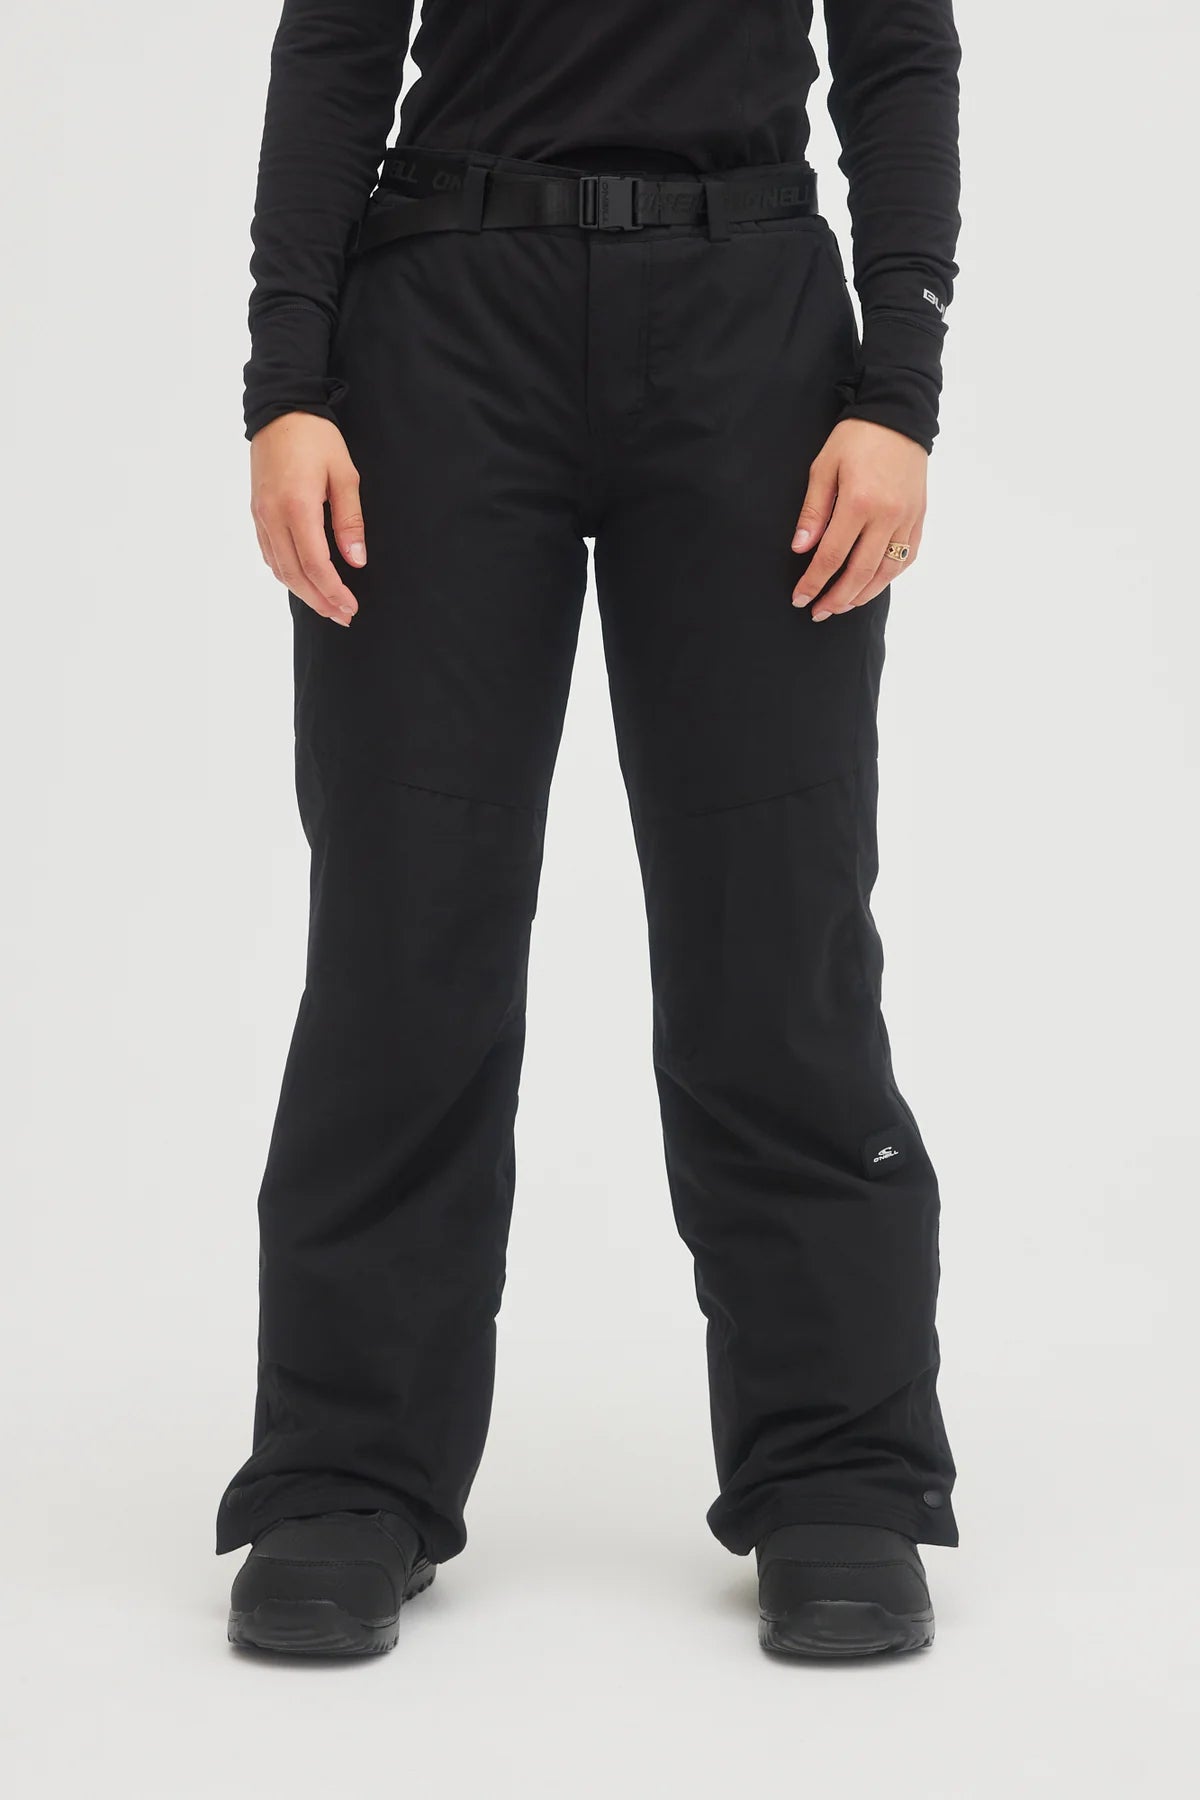 O'Neill Star Insulated Women'S Ski Snowboard Pants-Sports Replay - Sports Excellence-Sports Replay - Sports Excellence